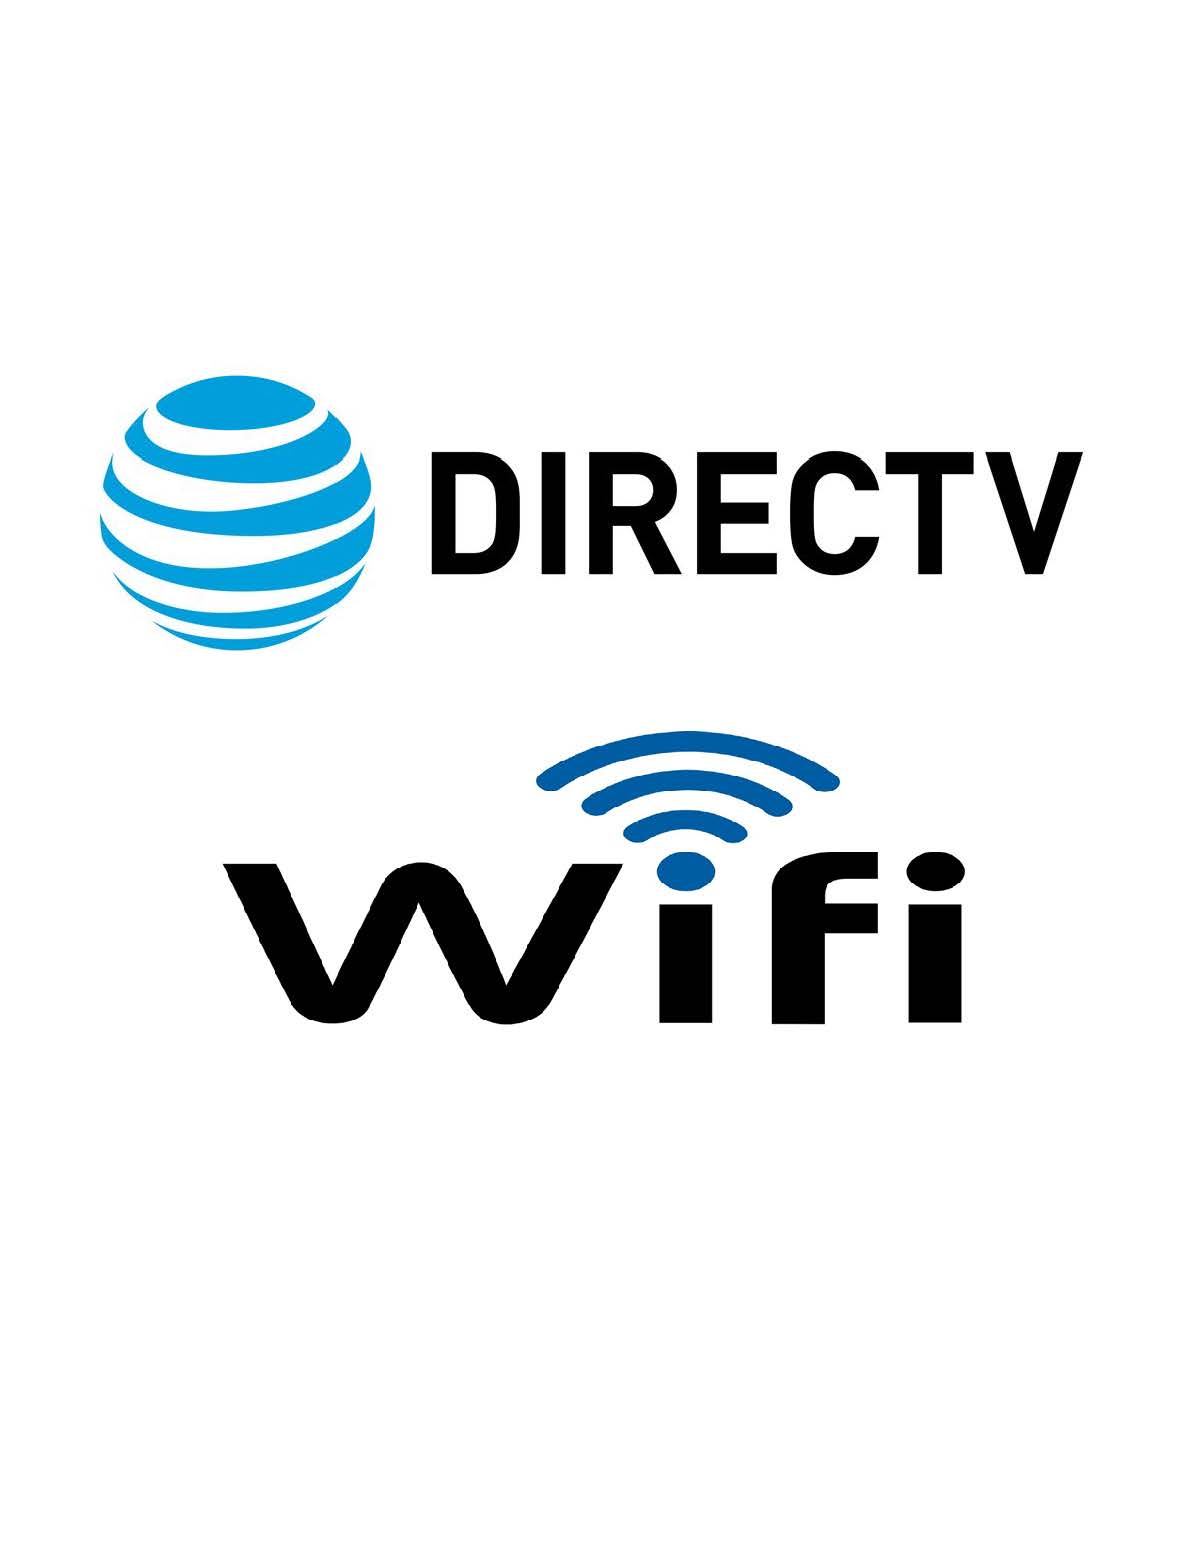 DirecTV and WiFi Full Upgrades